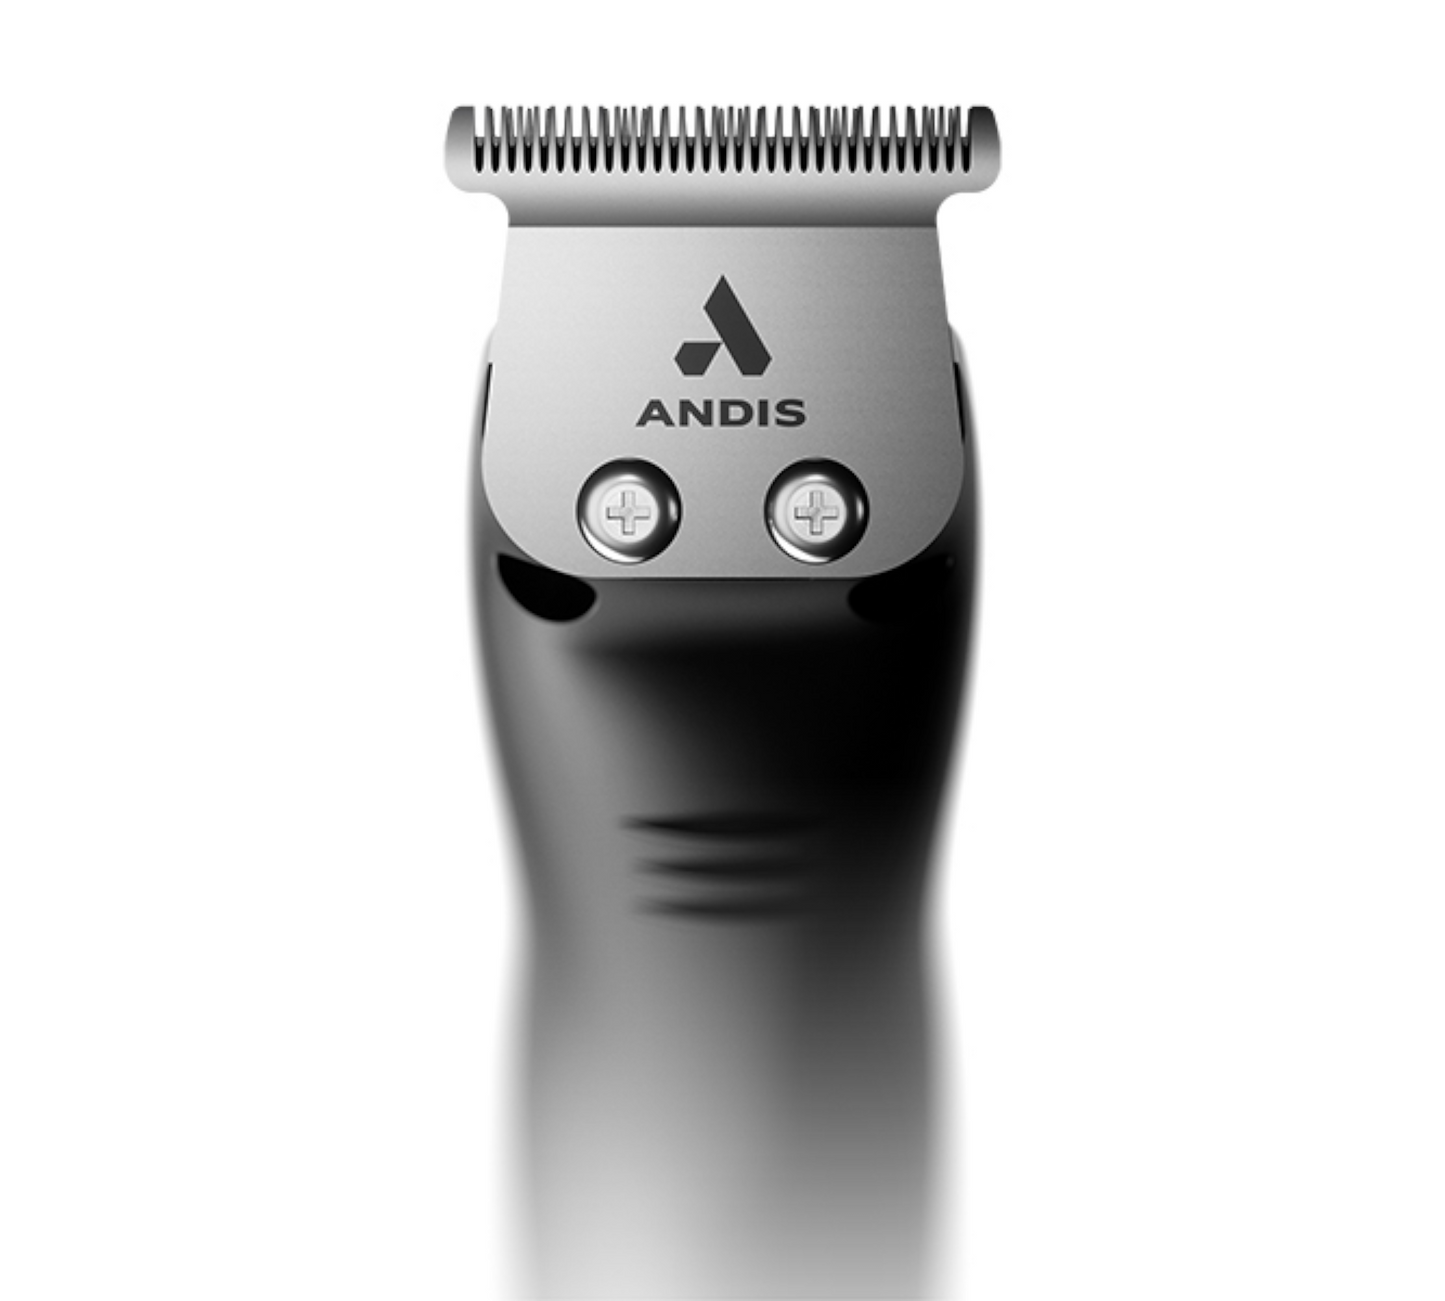 Andis Slimline 2 Cord/Cordless T-Blade Trimmer